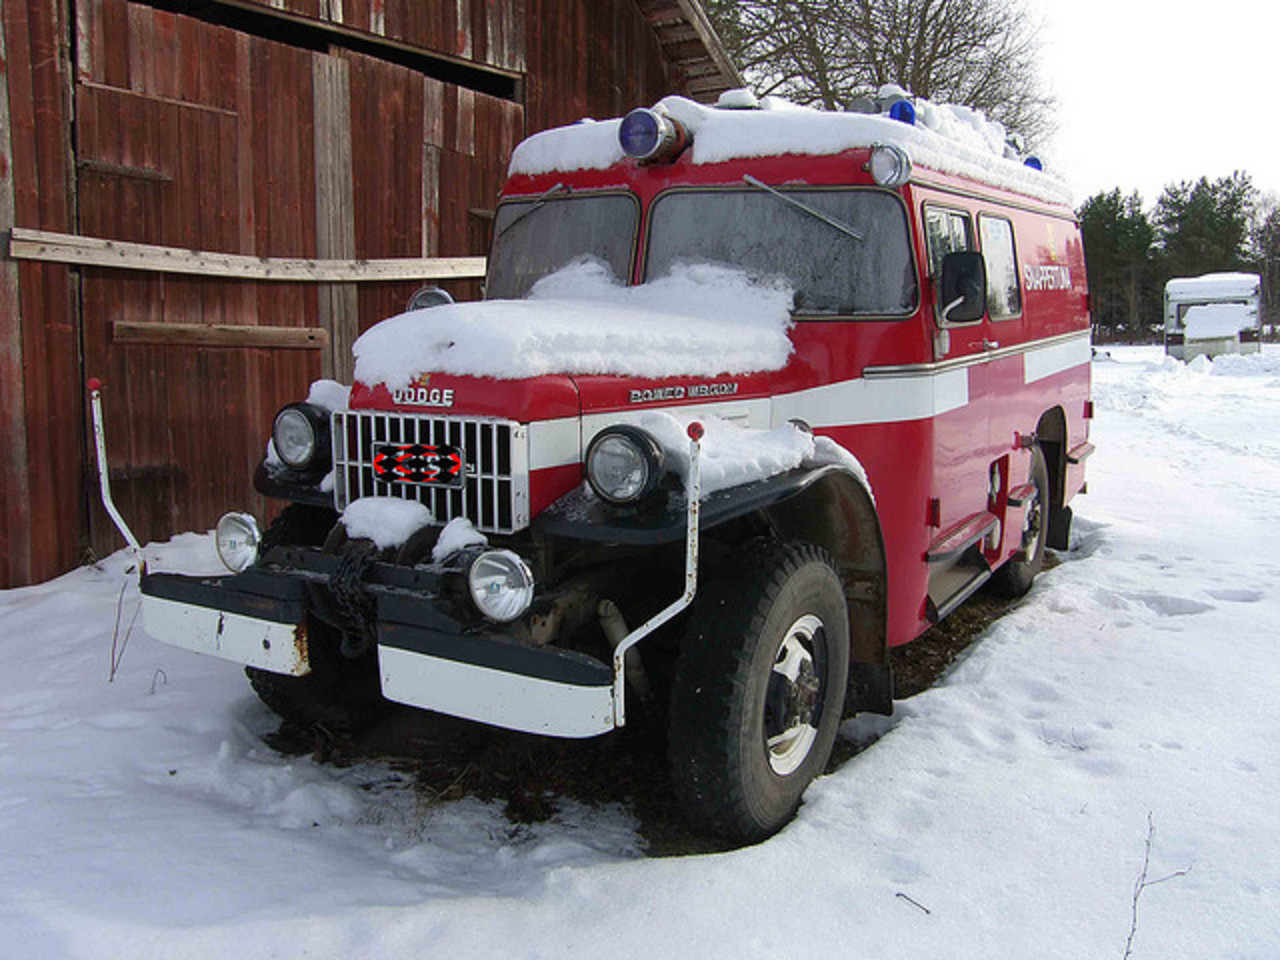 Old Dodge Power Wagon fire truck | Flickr - Photo Sharing!